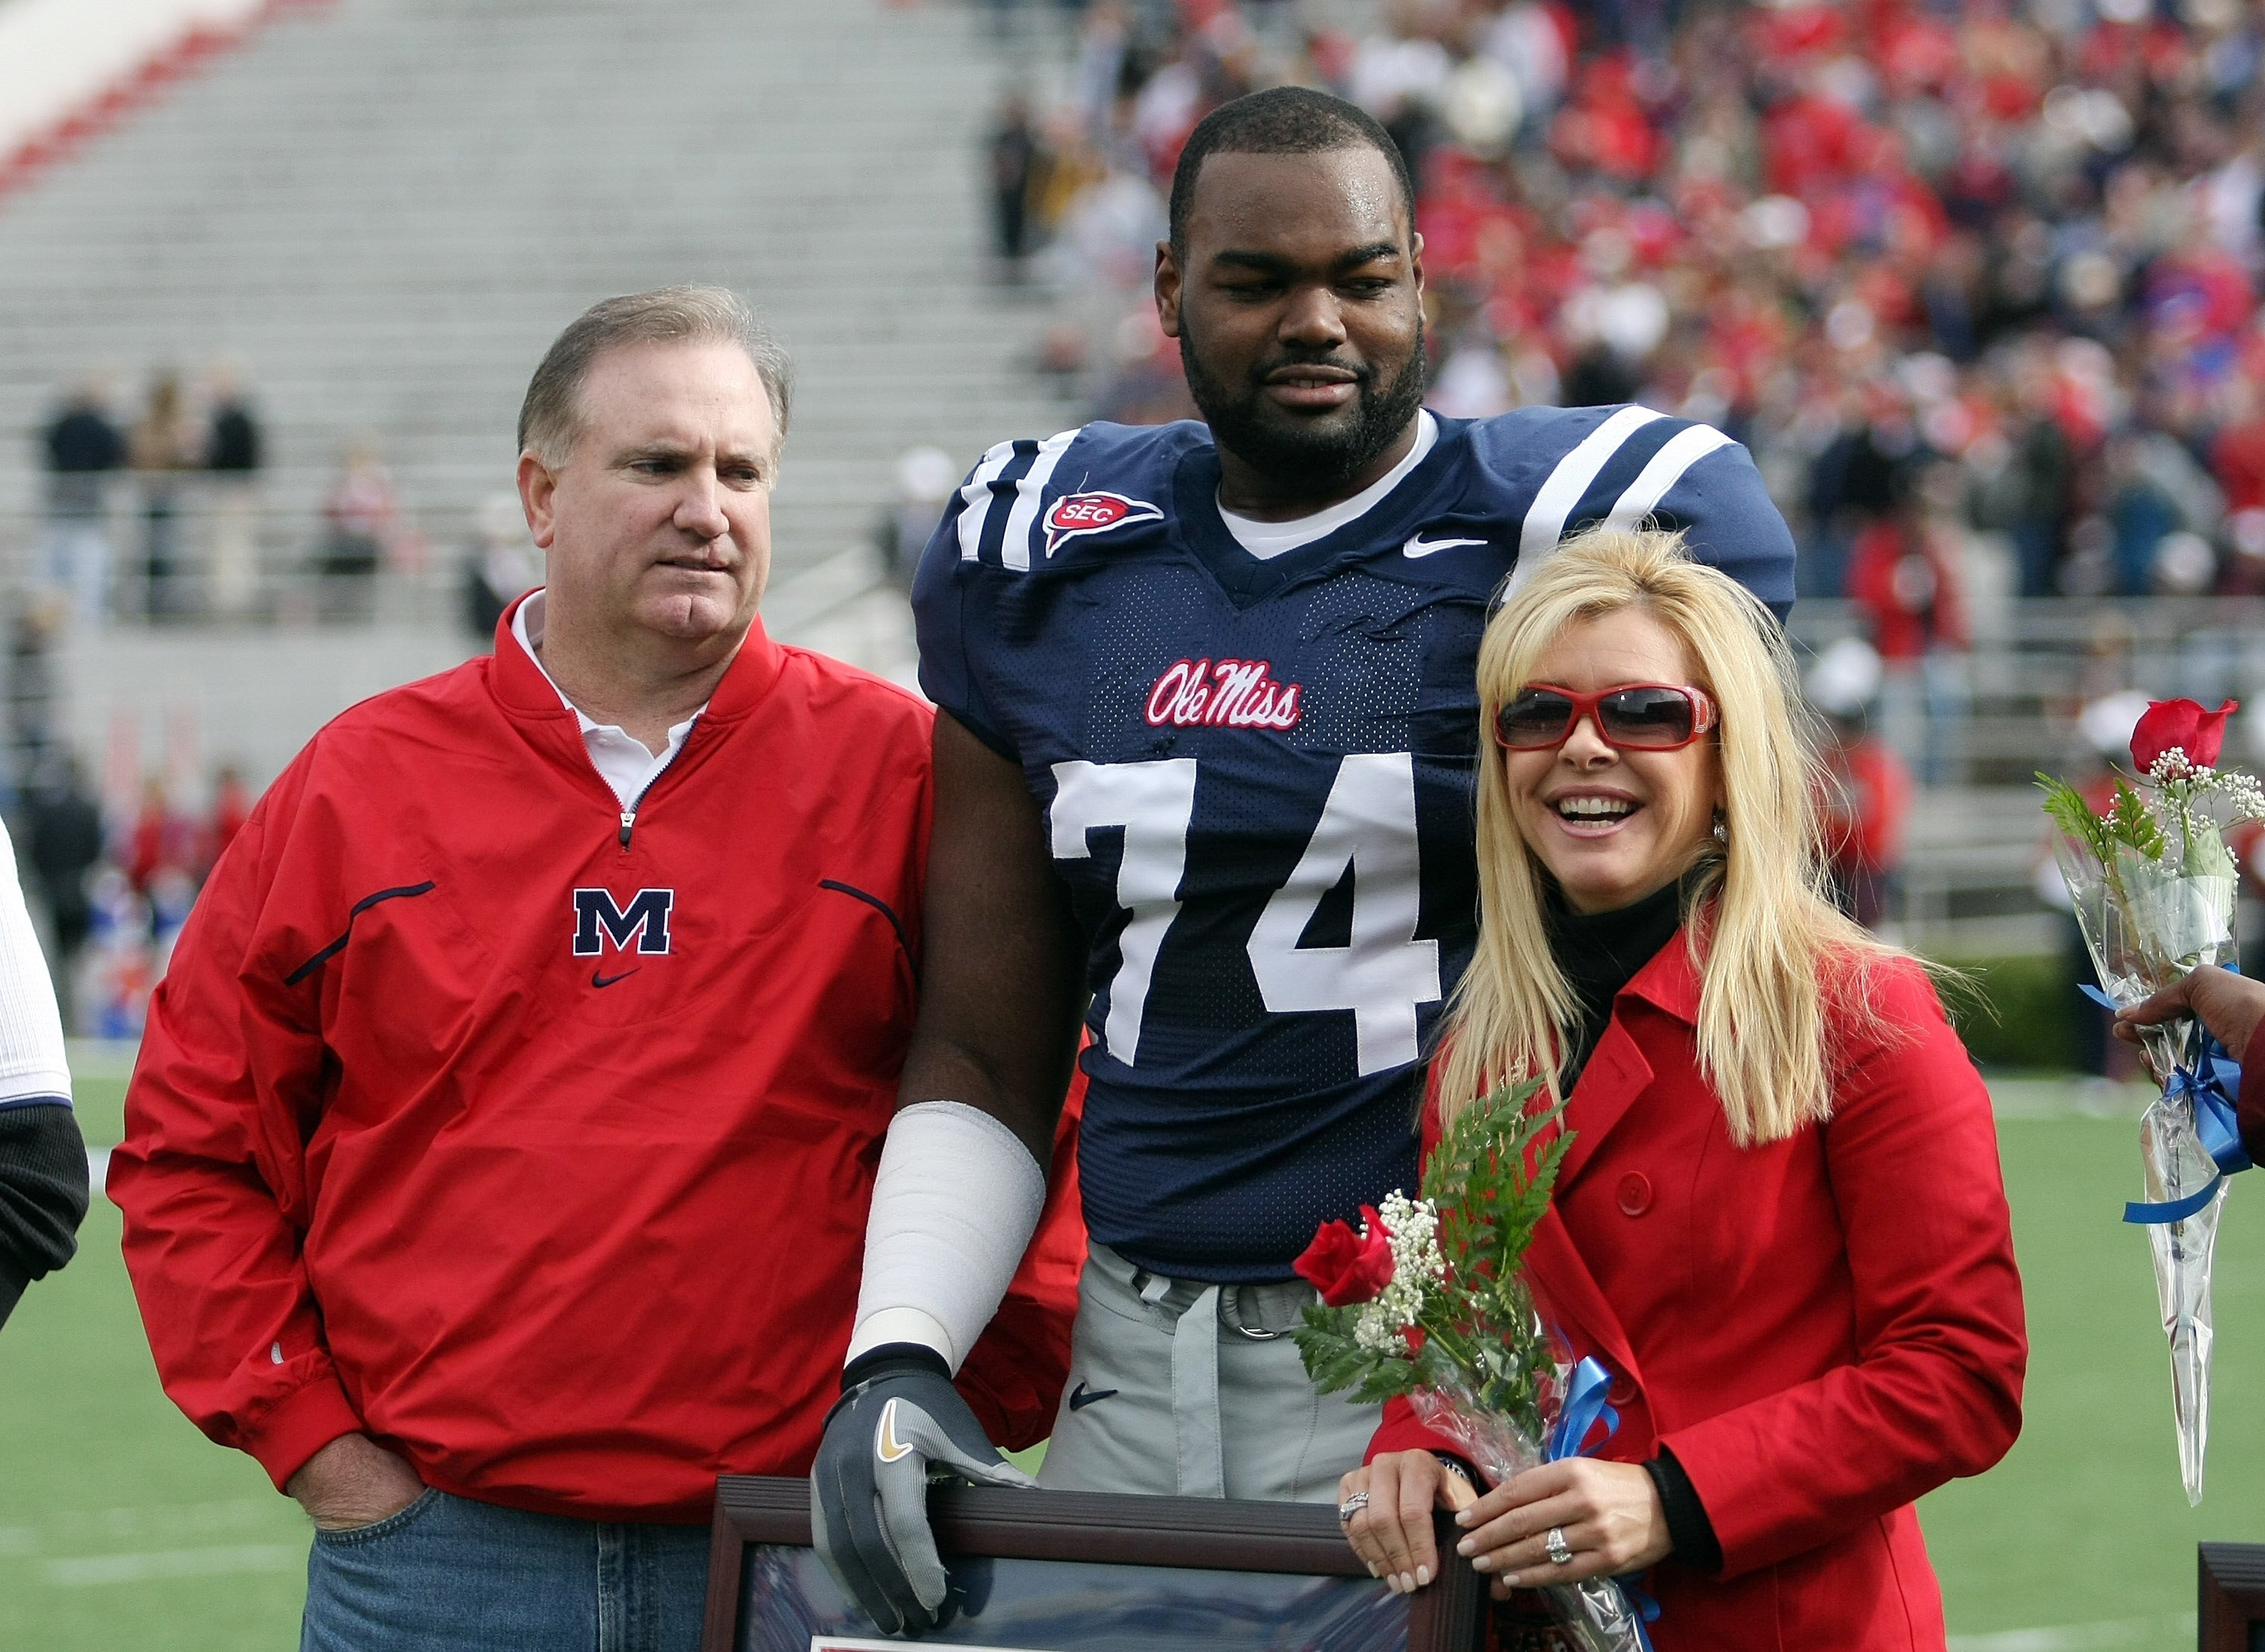 Michael Oher #74 of the Ole Miss Rebels stands with his family during senior ceremonies prior to a game against the Mississippi State Bulldogs at Vaught-Hemingway Stadium on November 28, 2008 in Oxford, Mississippi | Source: Getty Images 